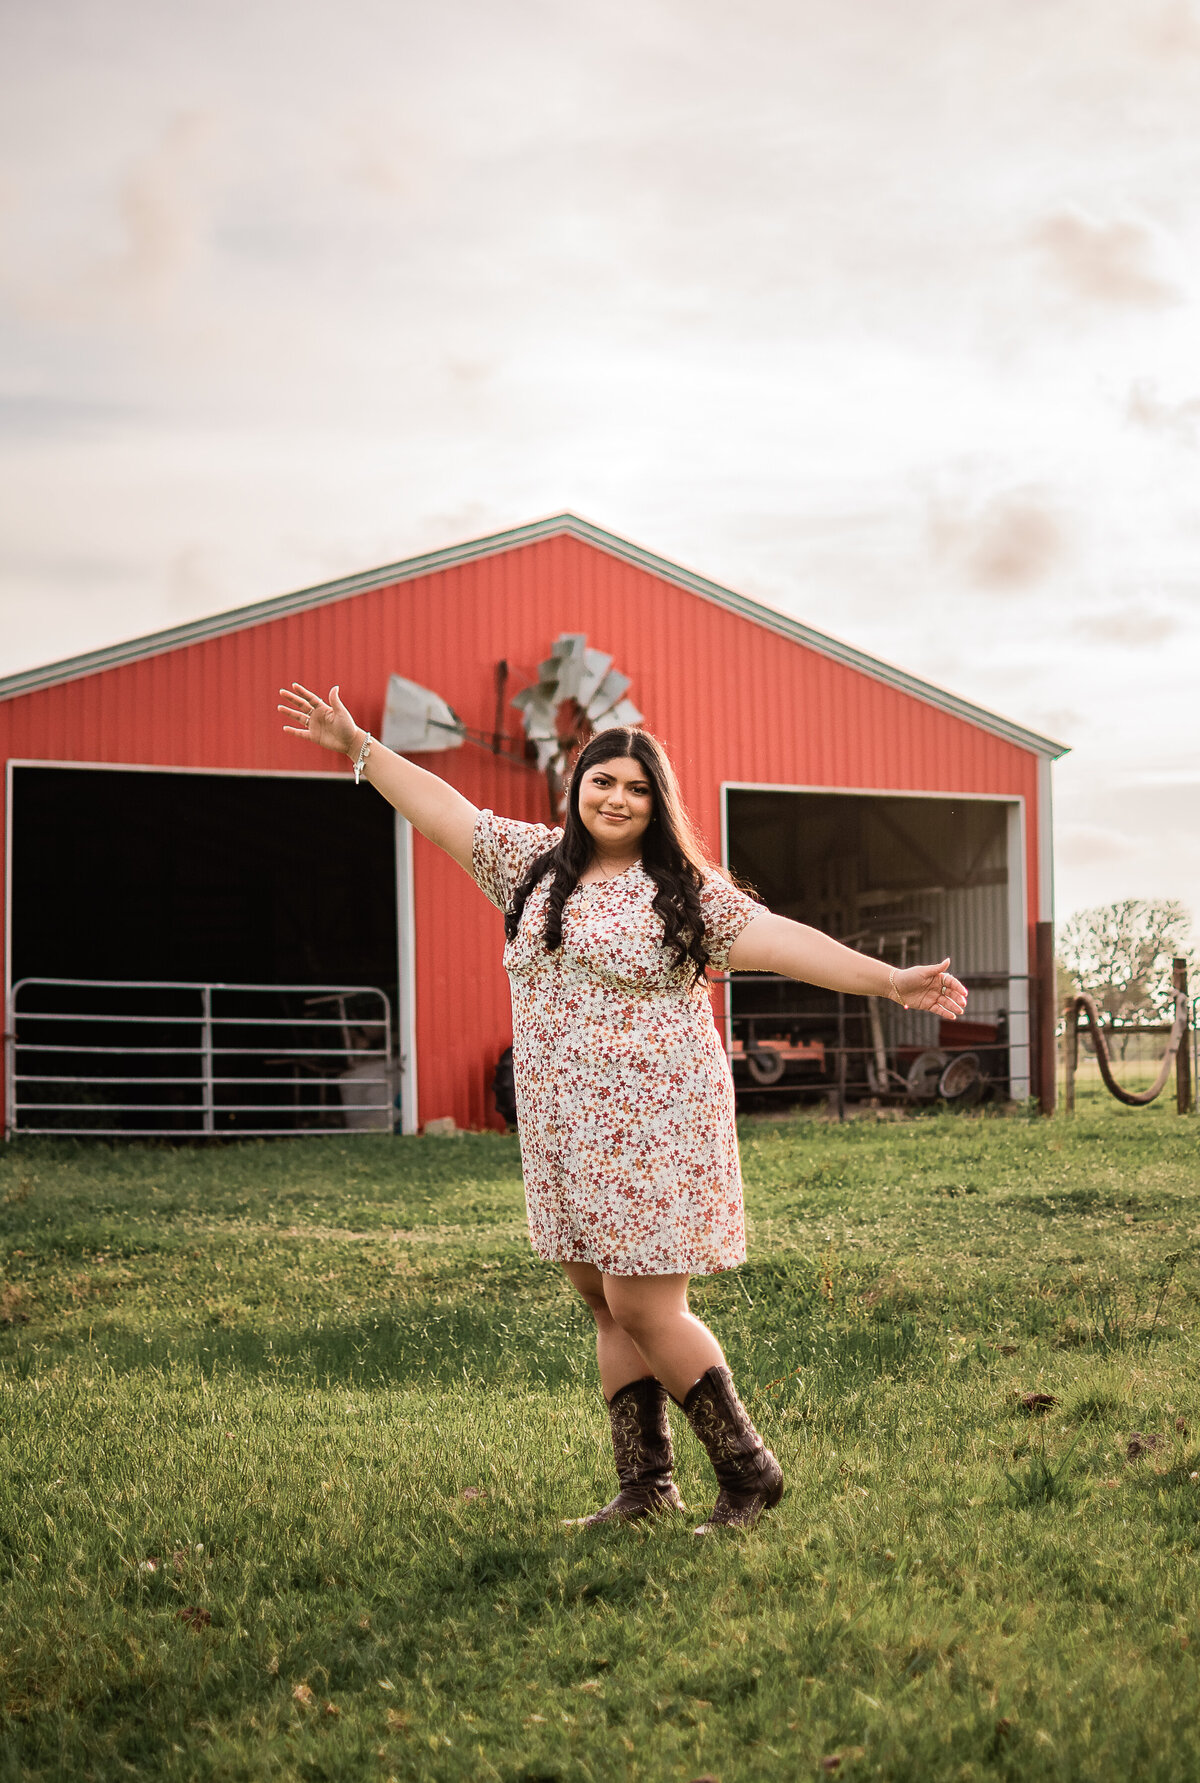 A Chavez High School senior stands in front of a red barn with her arms outstretched.